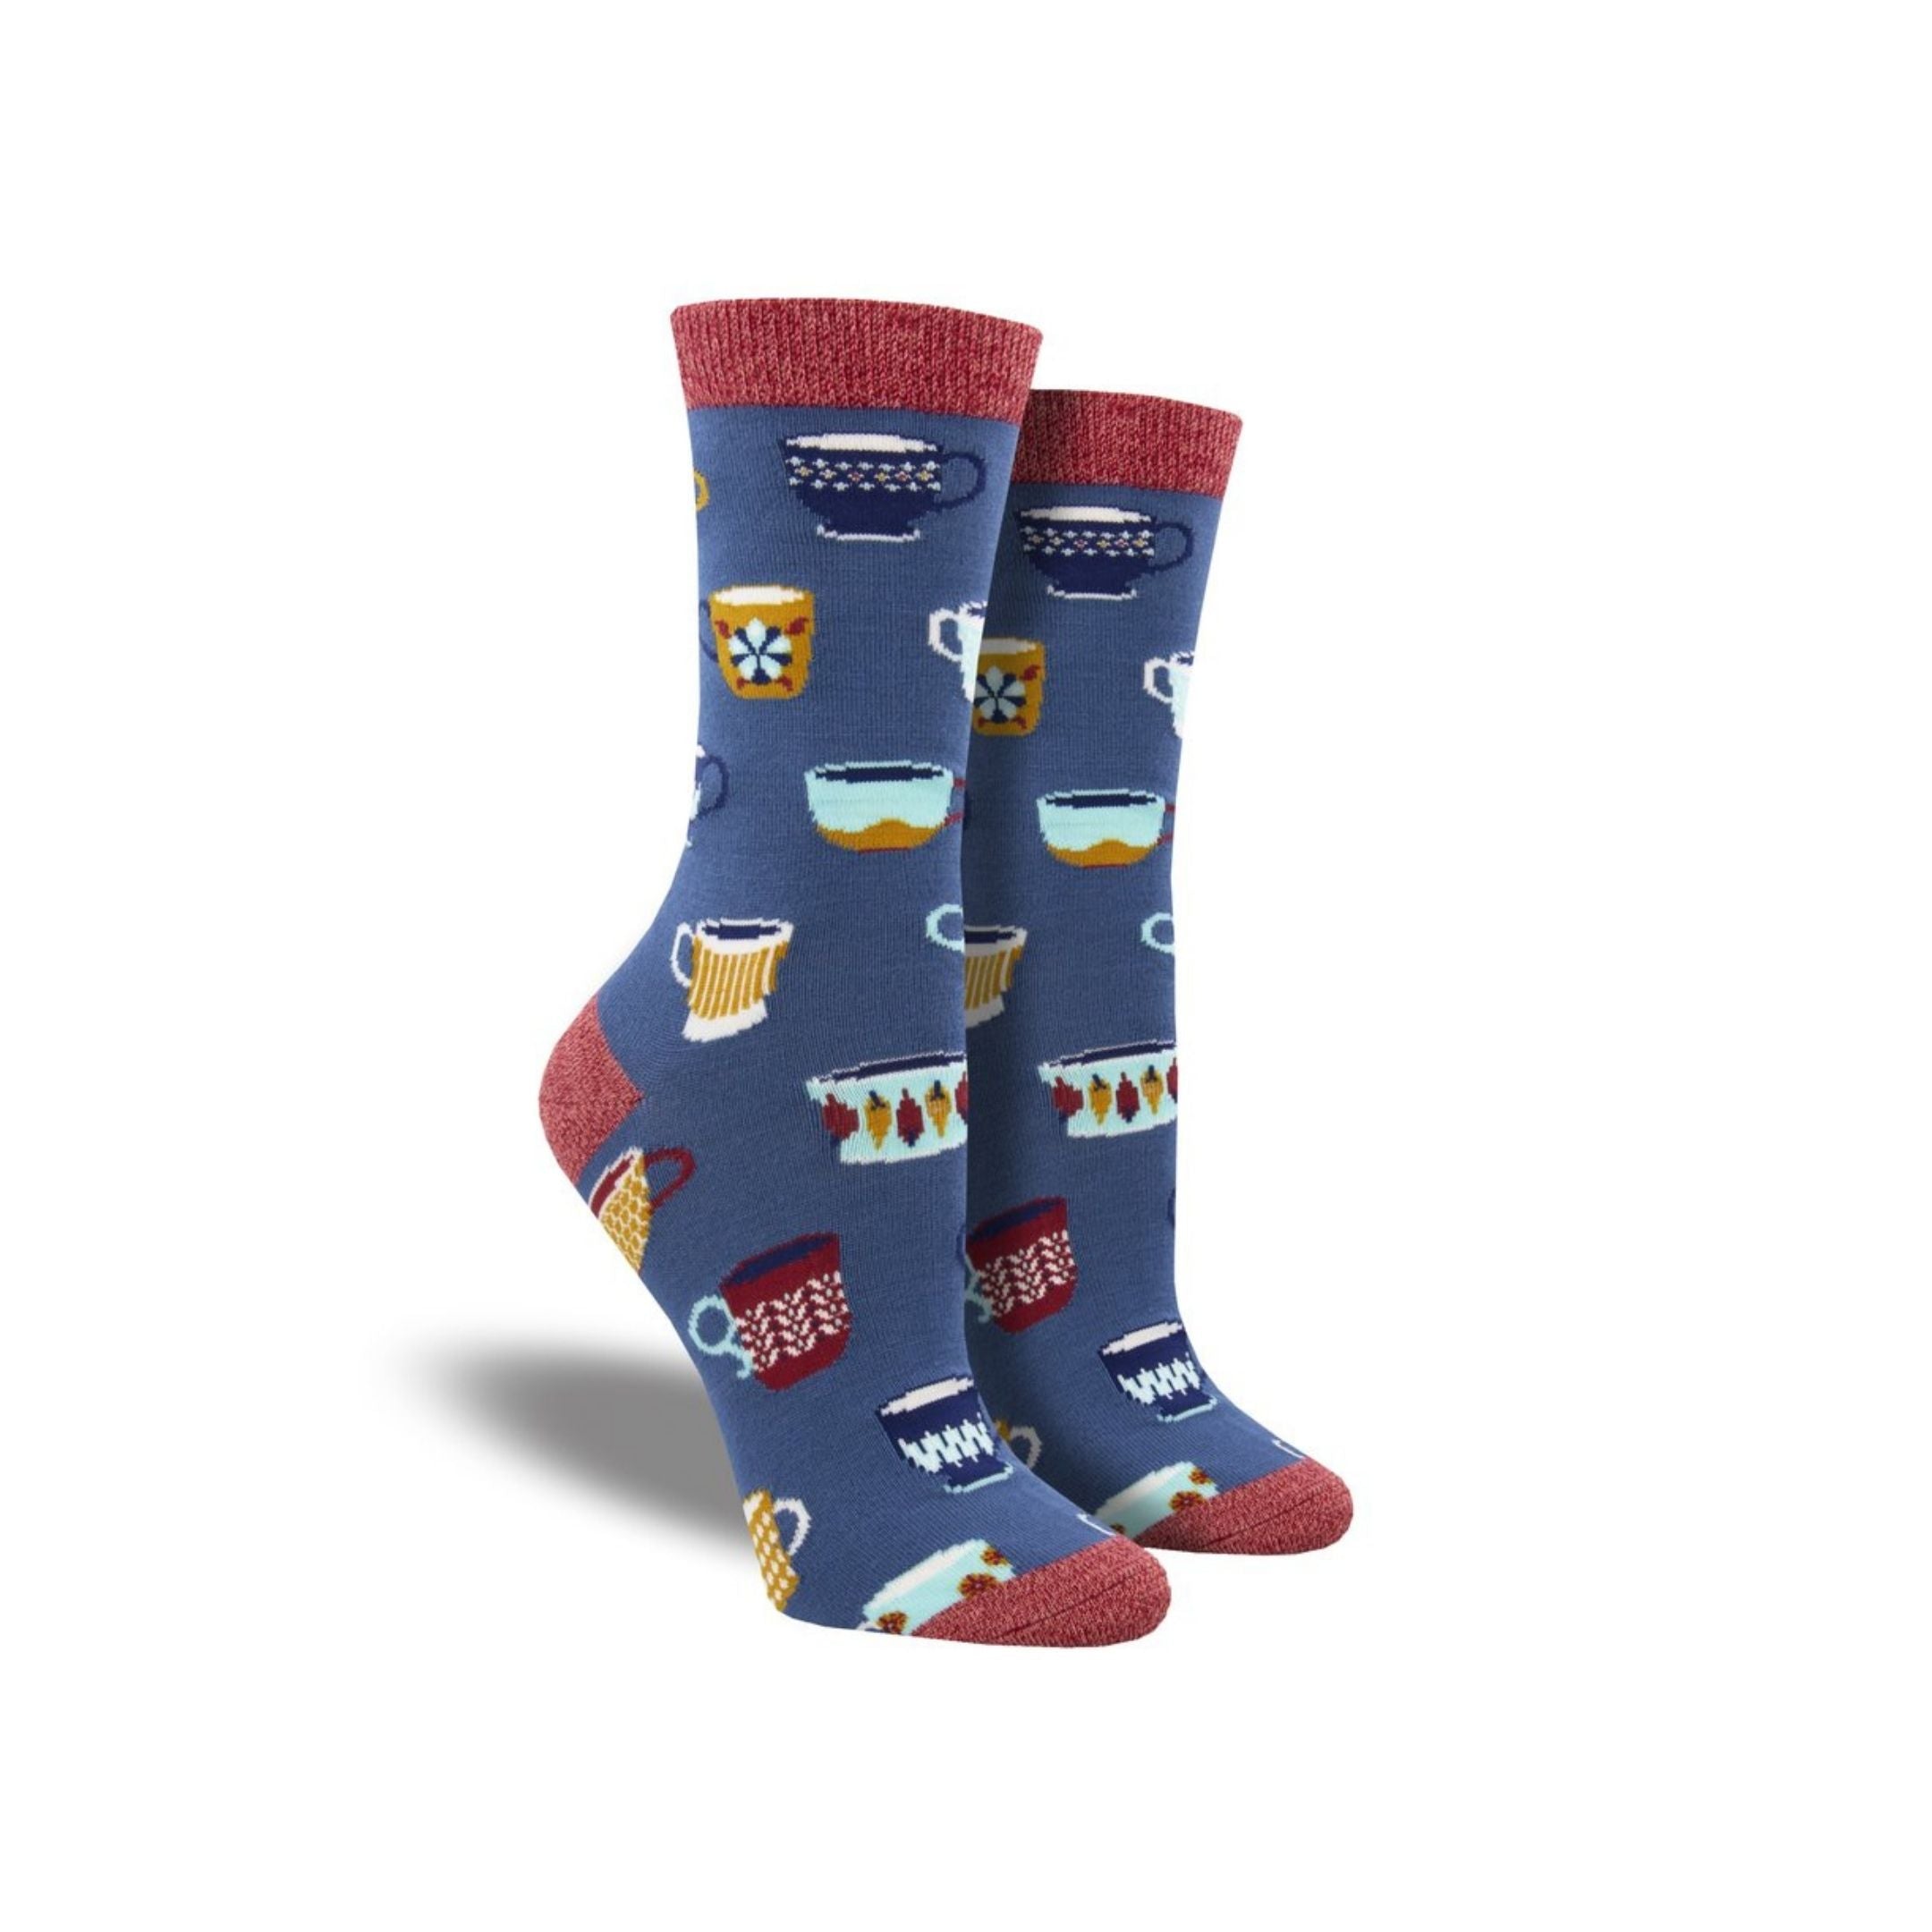 Blue socks with red accents featuring multiple types of mugs